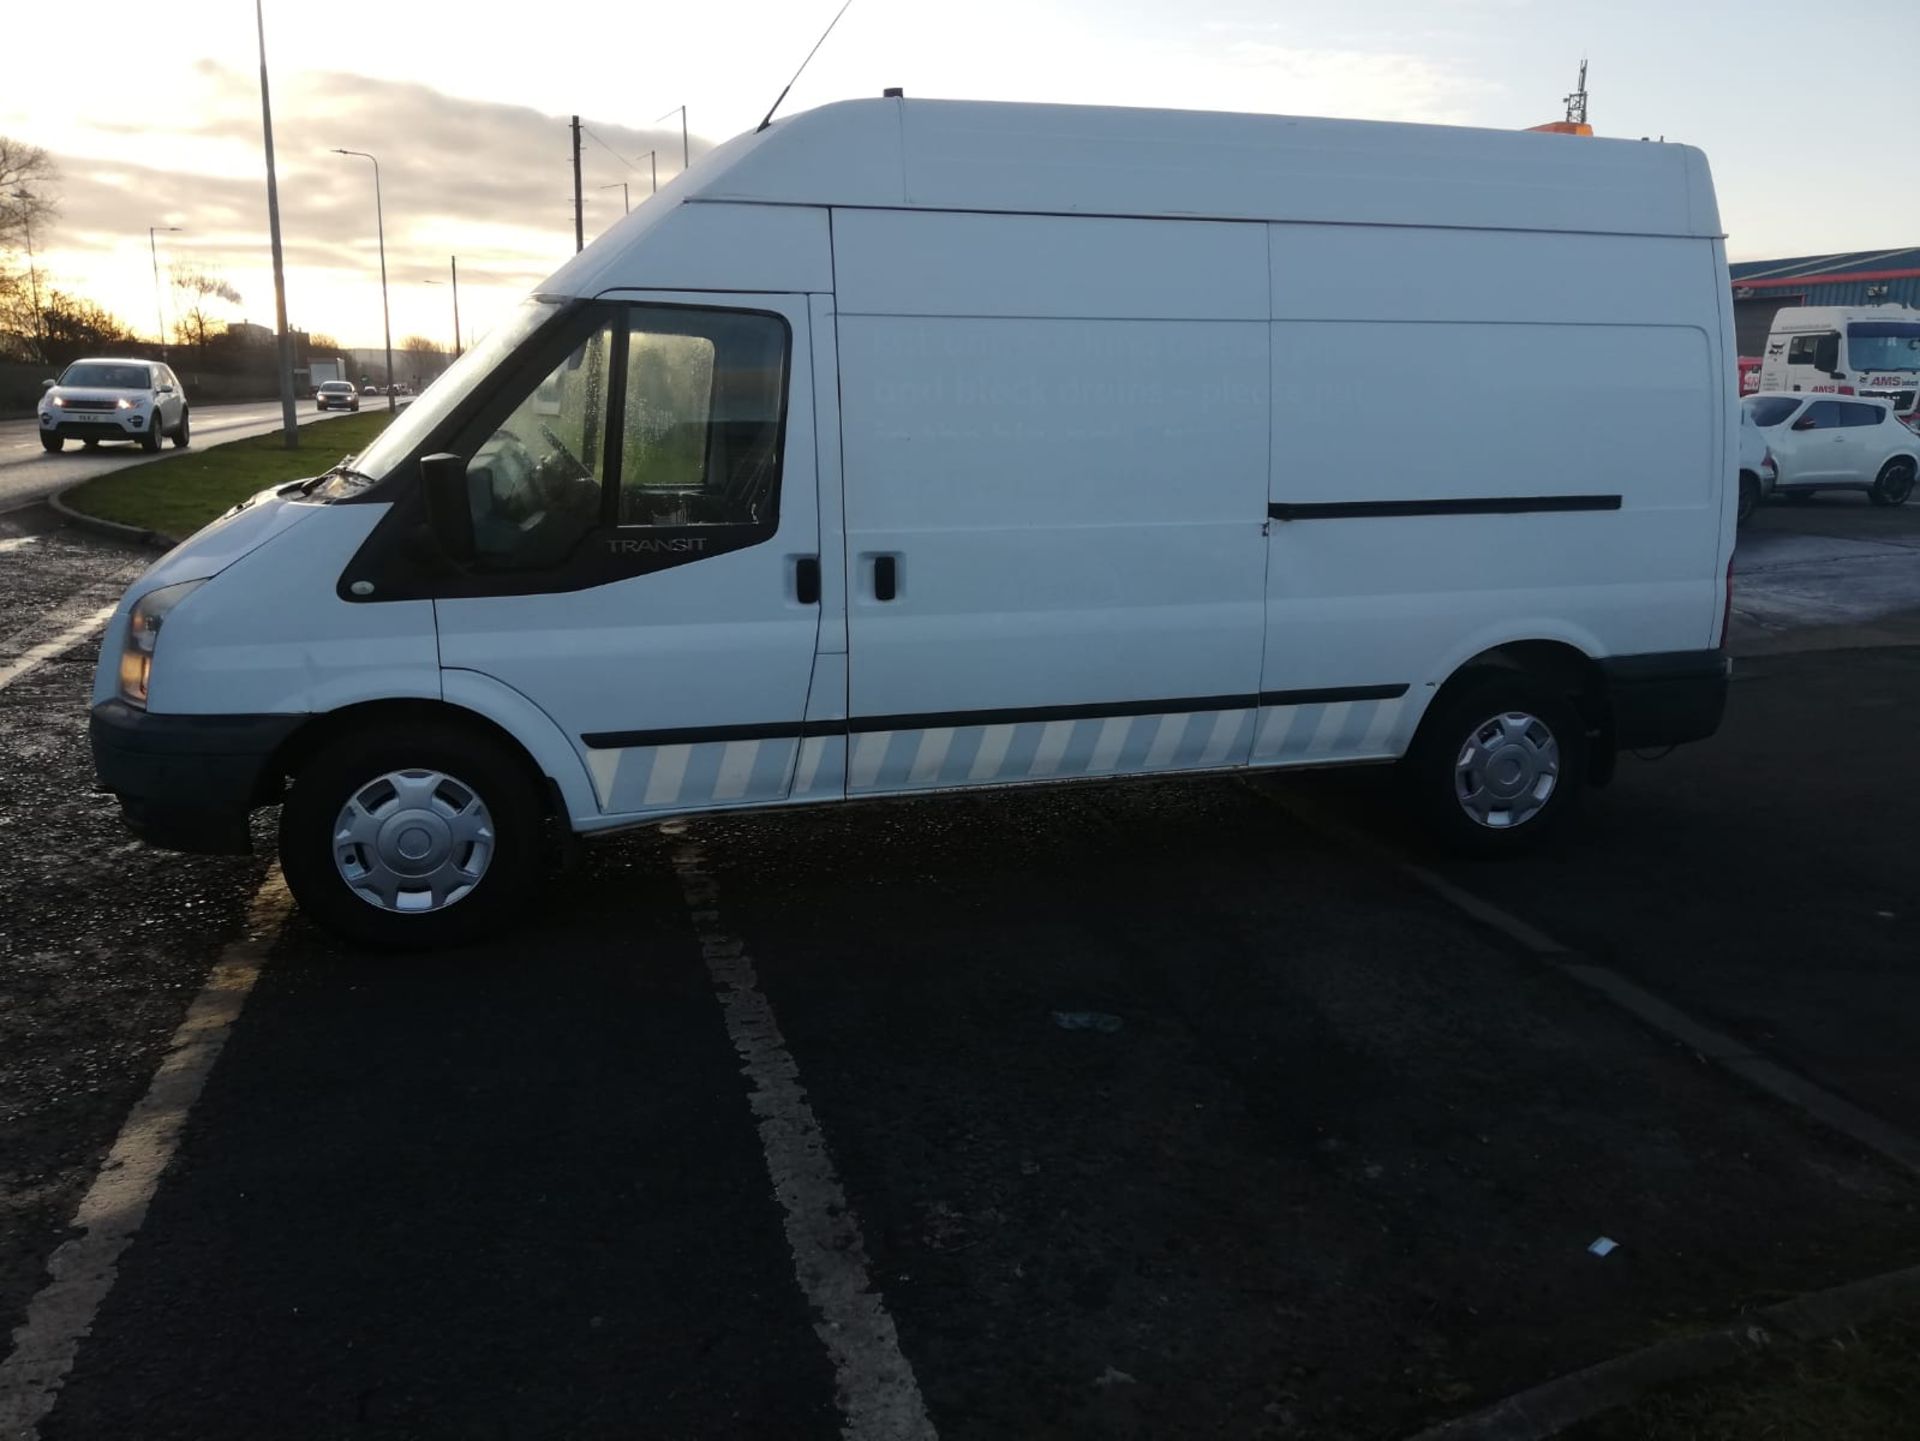 2011/61 FORD TRANSIT 125 T350 TREND FWD LWB HIGH TOP PANEL VAN, 92K MILES, REAR HIAB CRANE FITTED - Image 4 of 9